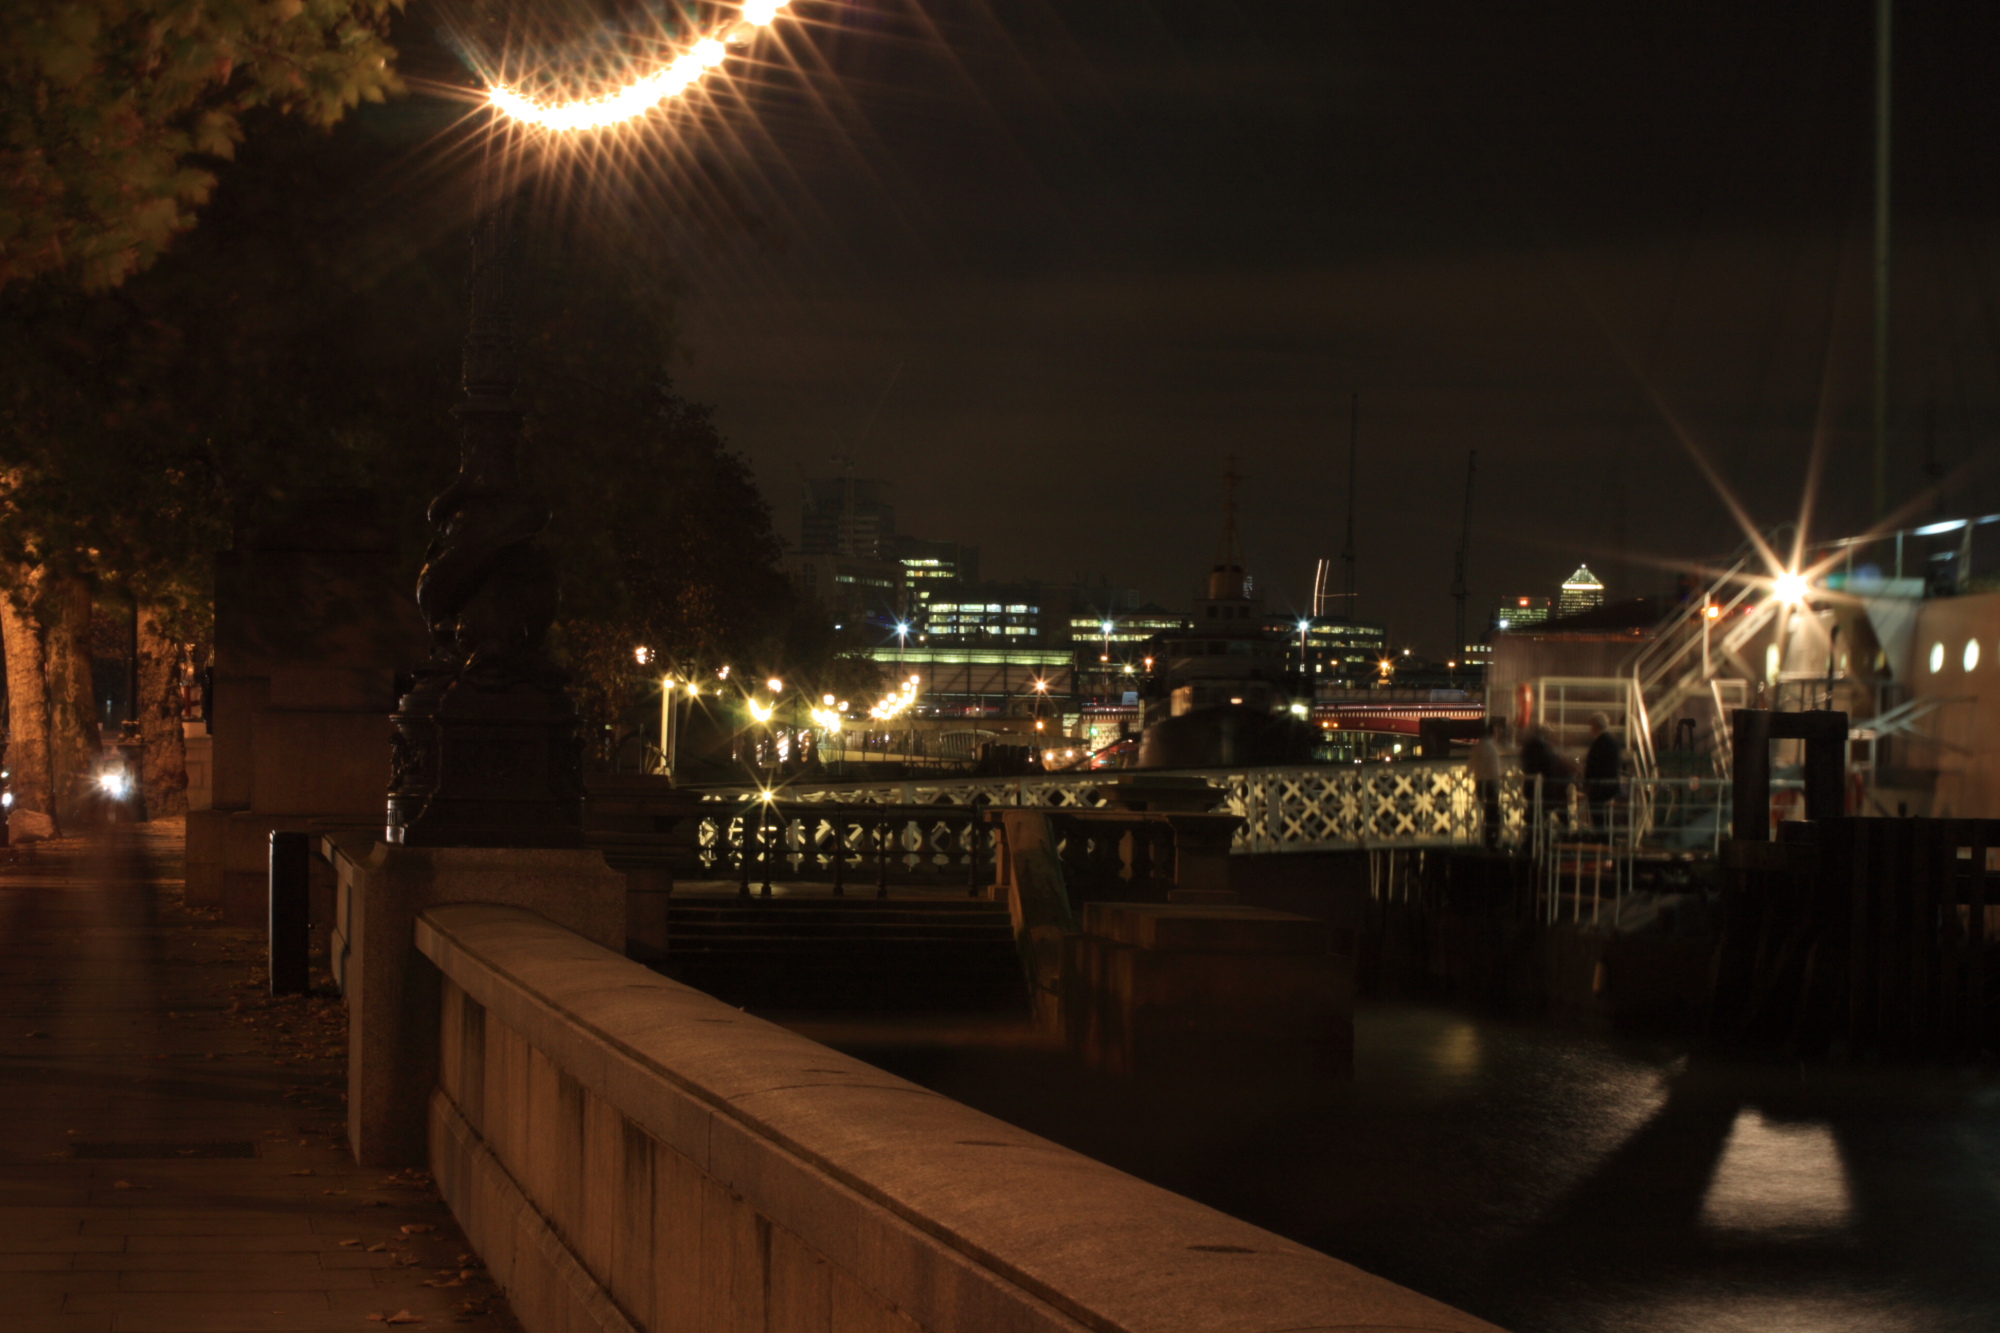 Boats on the Thames at night infront of the London sky line.